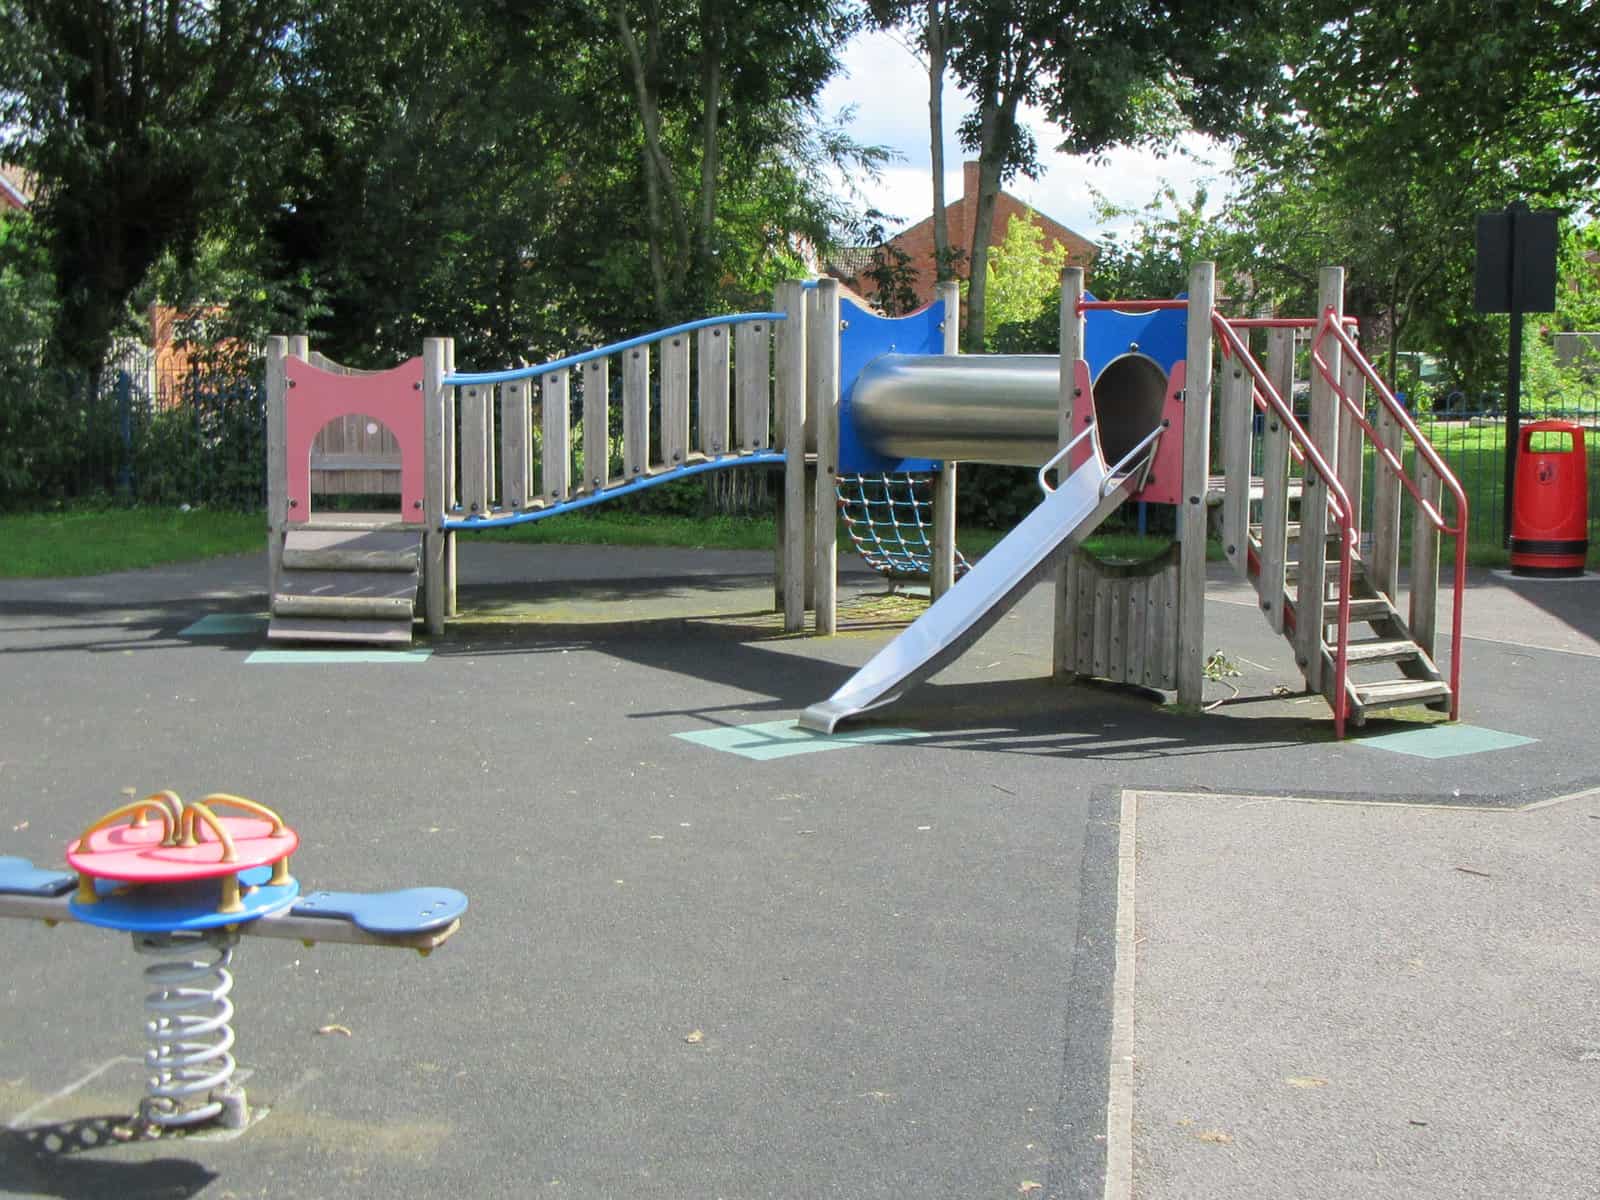 Gooseacre playground and recreation area